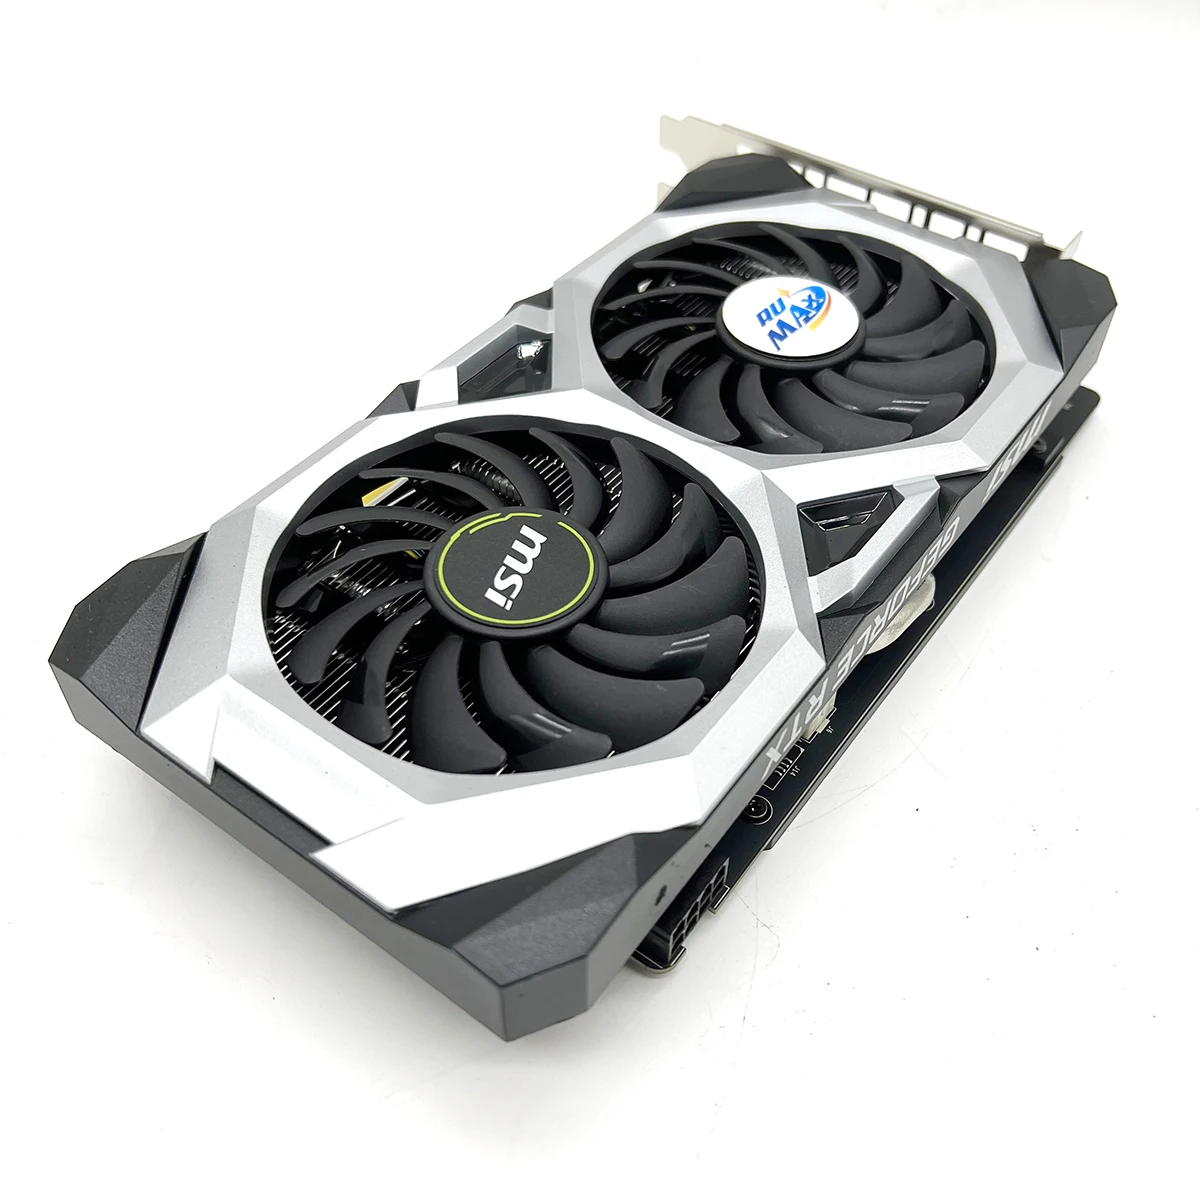 Hot Selling Rtx 2060 2060s Super 8g Graphics Cards N Vidia Chip 2060 Super Rtx - Buy 2060s Super 8g Graphics Cards,Rtx 2060,2060 Super Product on